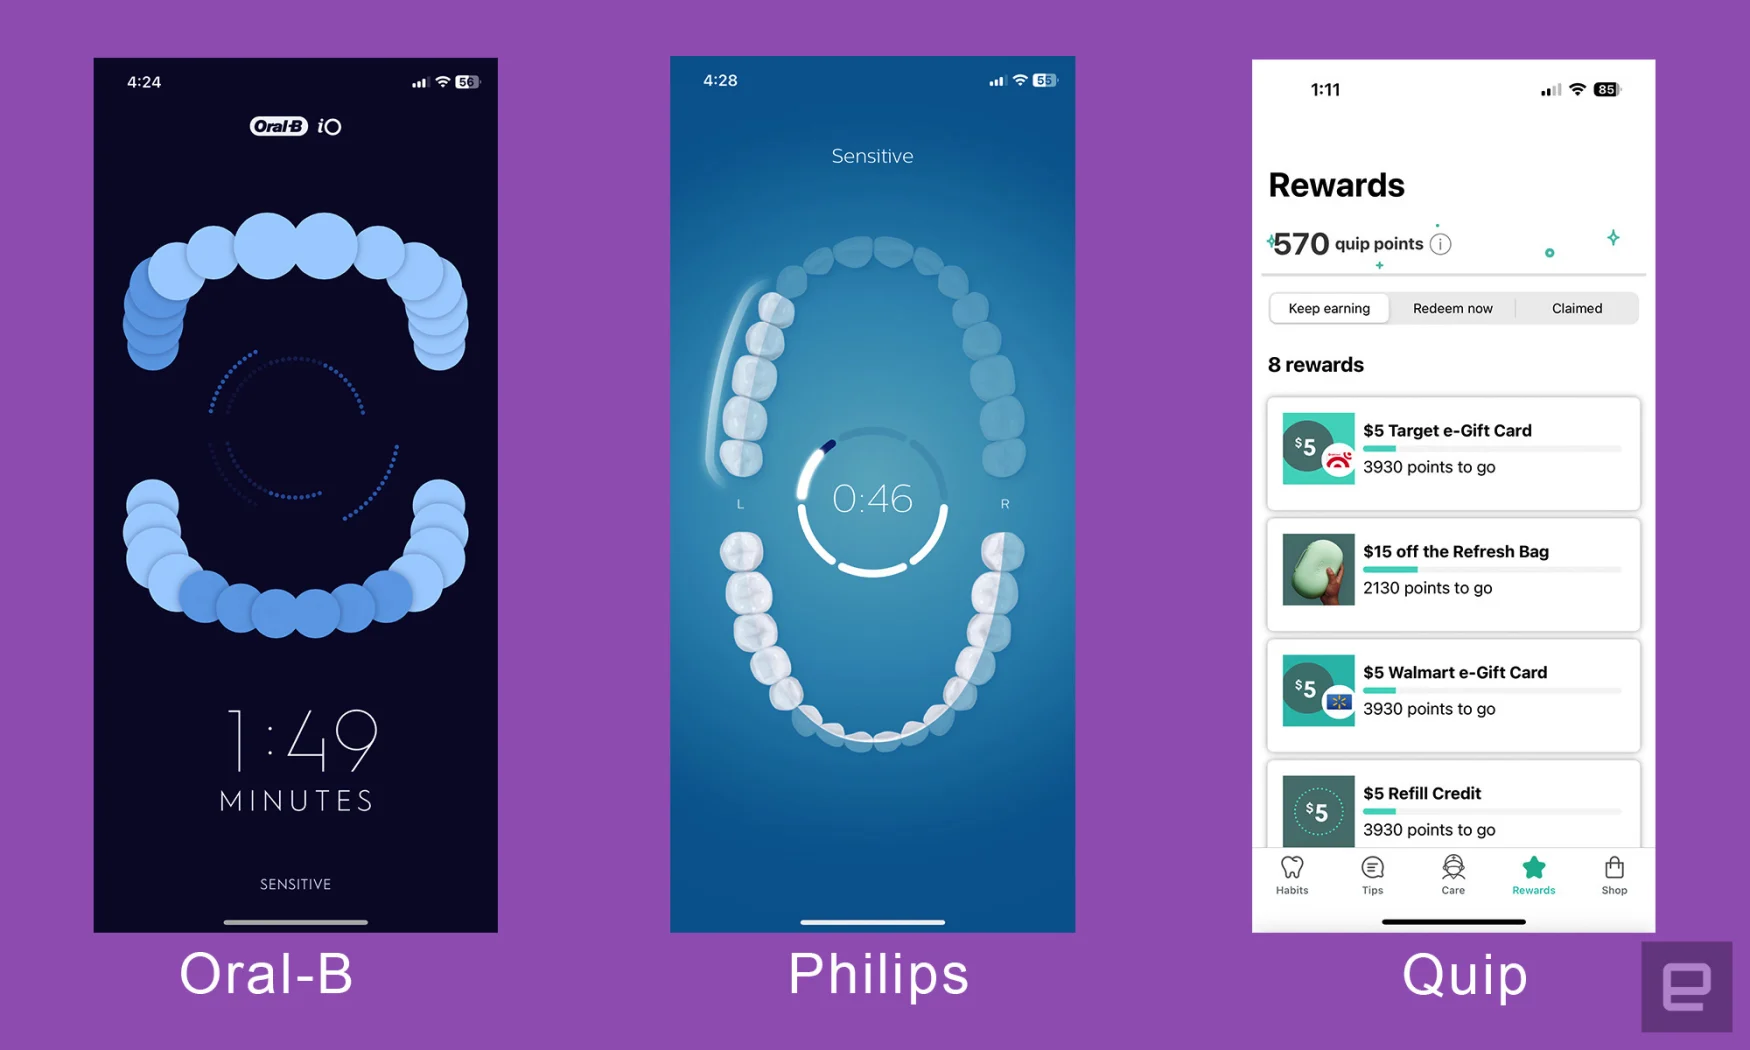 Three screenshots from the companion apps from Oral-B, Philips and Quip smart toothbrushes. The Oral-B and Philips app show a 3D model of teeth, while the Quip app offers gift card rewards for brushing.
